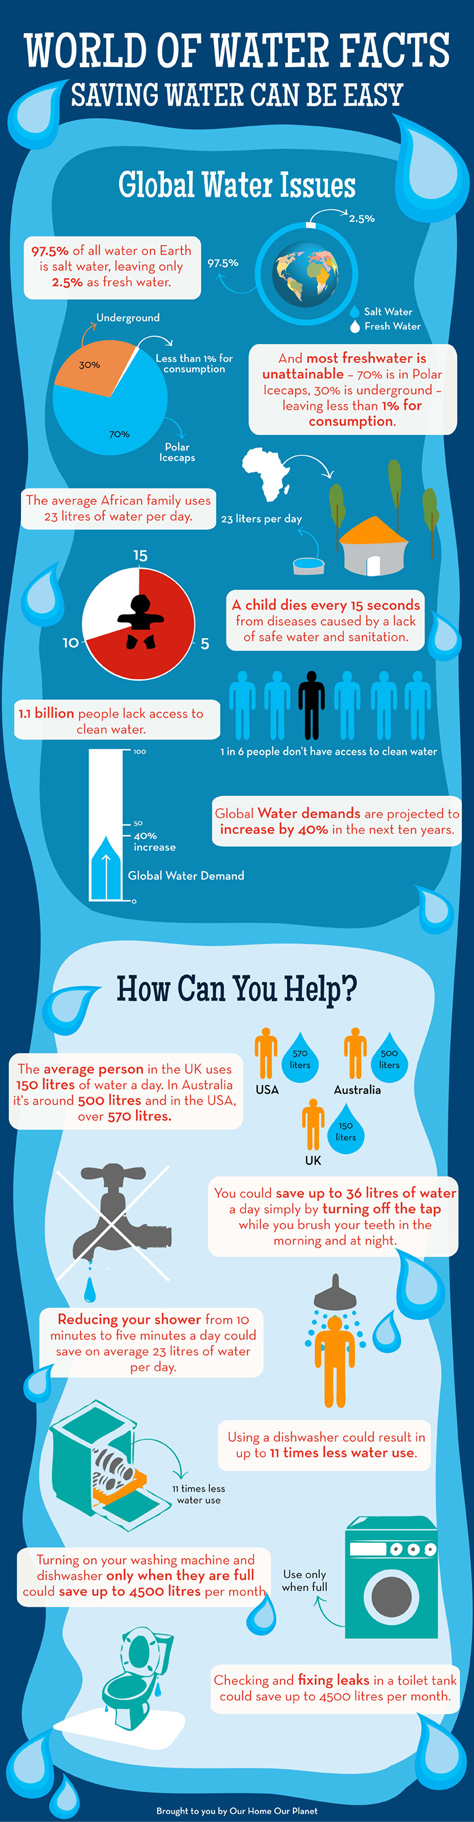 infographic-world-of-water-facts-big